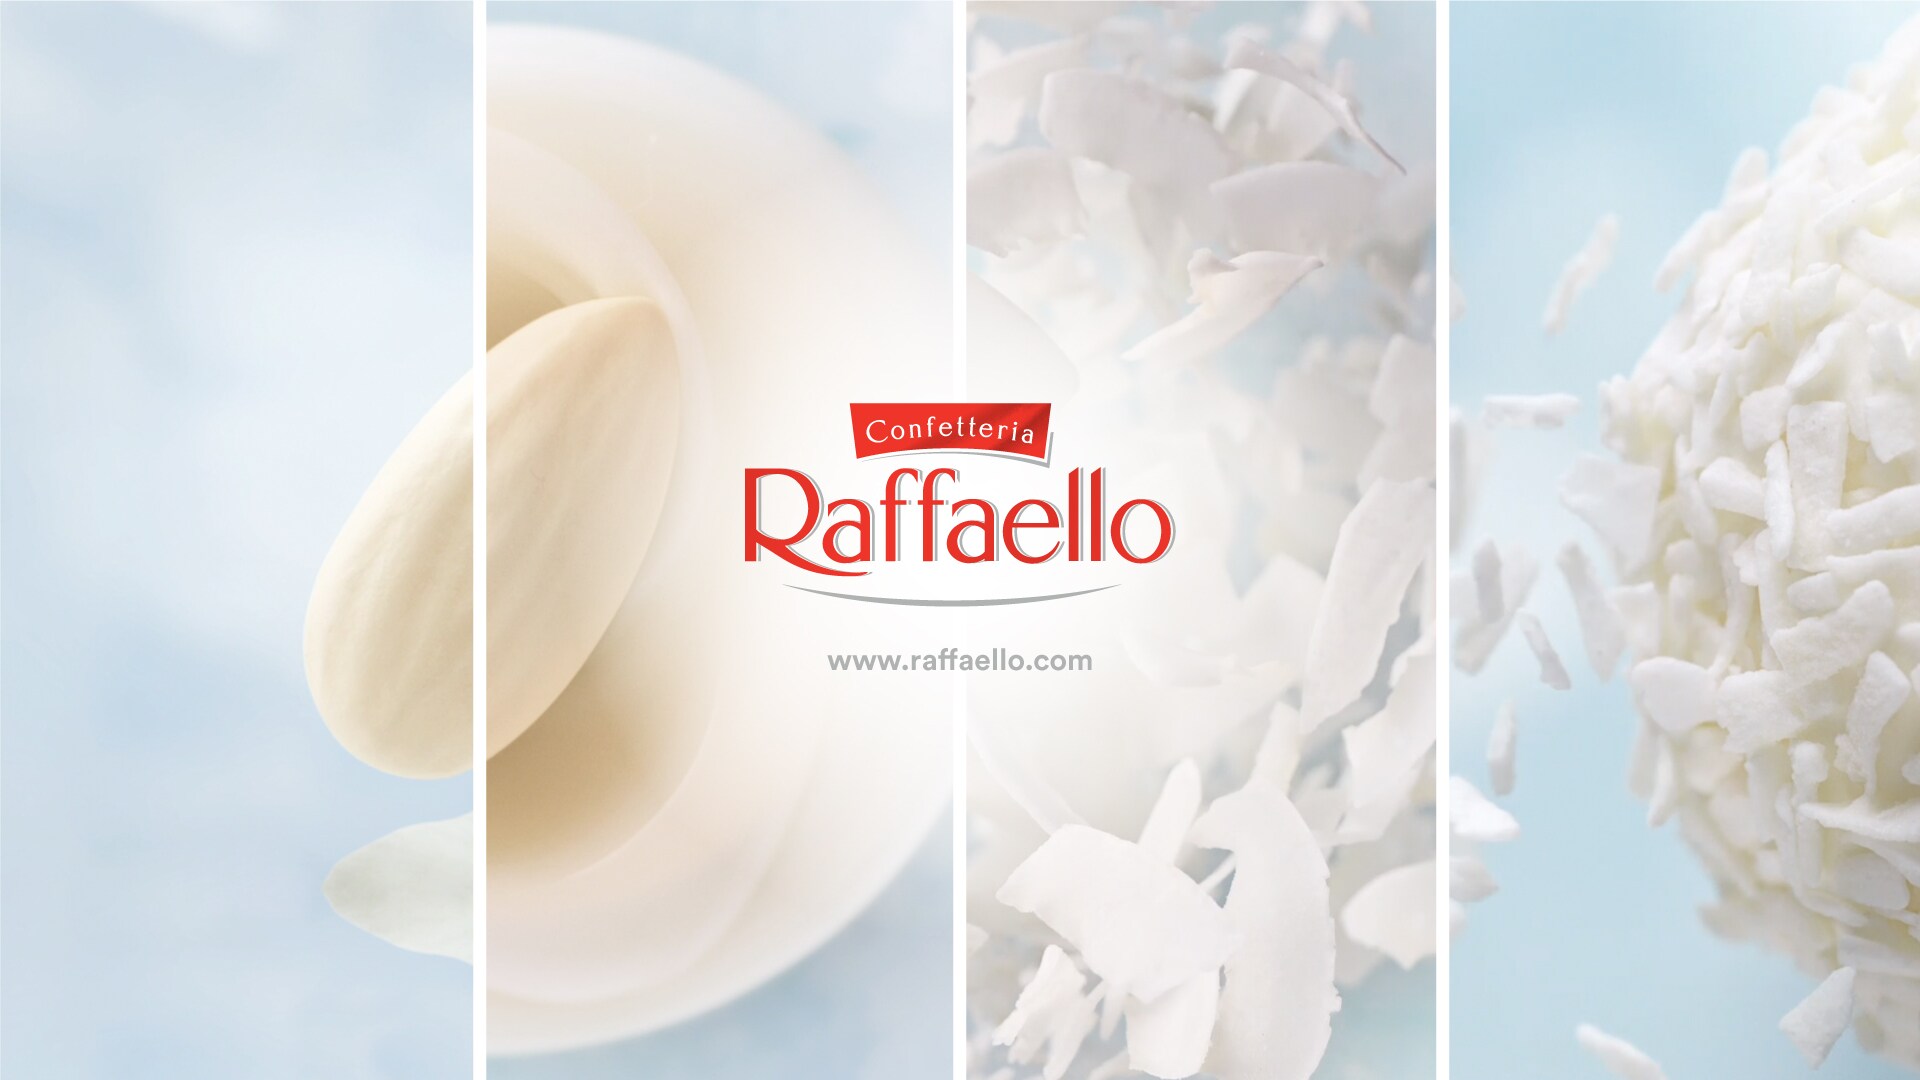 Join us in discovering the extended Raffaello Experience.